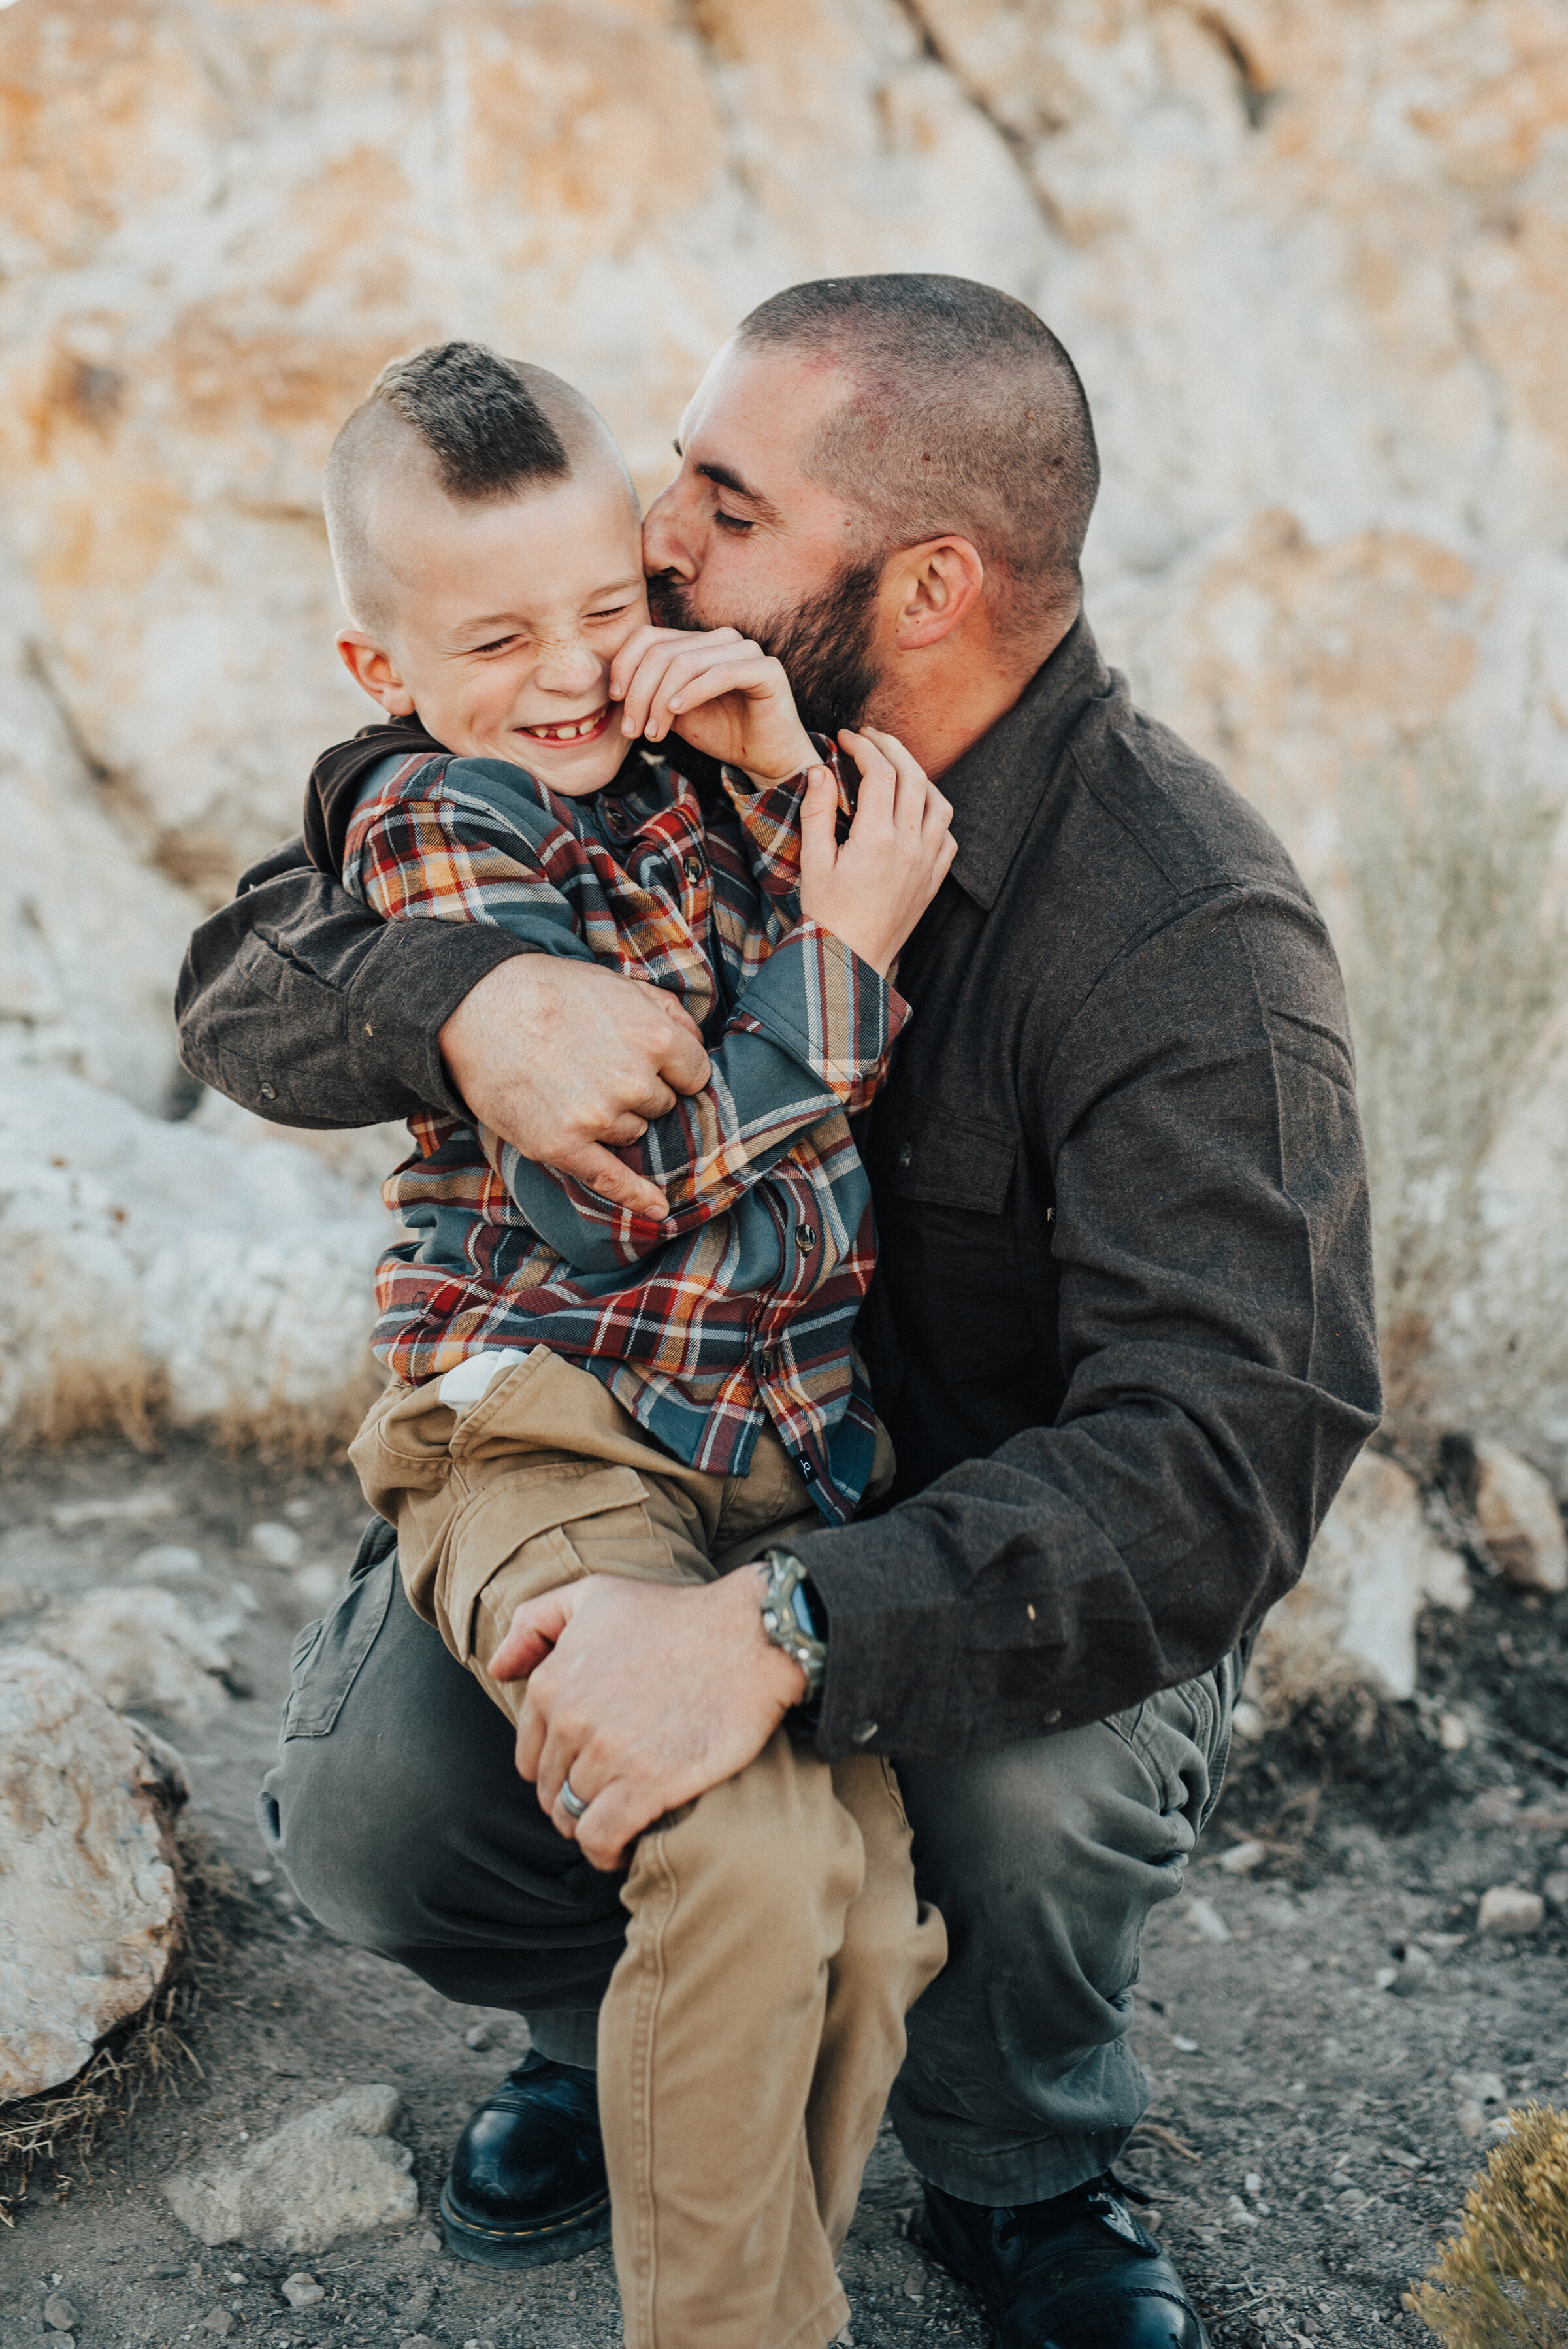  A sweet and playful moment between a father and his son in beautiful family pics by Kristi Alyse Photography. Utah photographer father and son pose inspiration ideas and goals outdoor photo shoot goals family inspiration client attire inspiration Syracuse Utah father and son fun Salt Lake City family pictures #familypictures #utahphotographer #antelopeisland #outfitinspo #familypics #familyphotographer #pinkhair #saltlakecityphotog #slcfamilypictures 